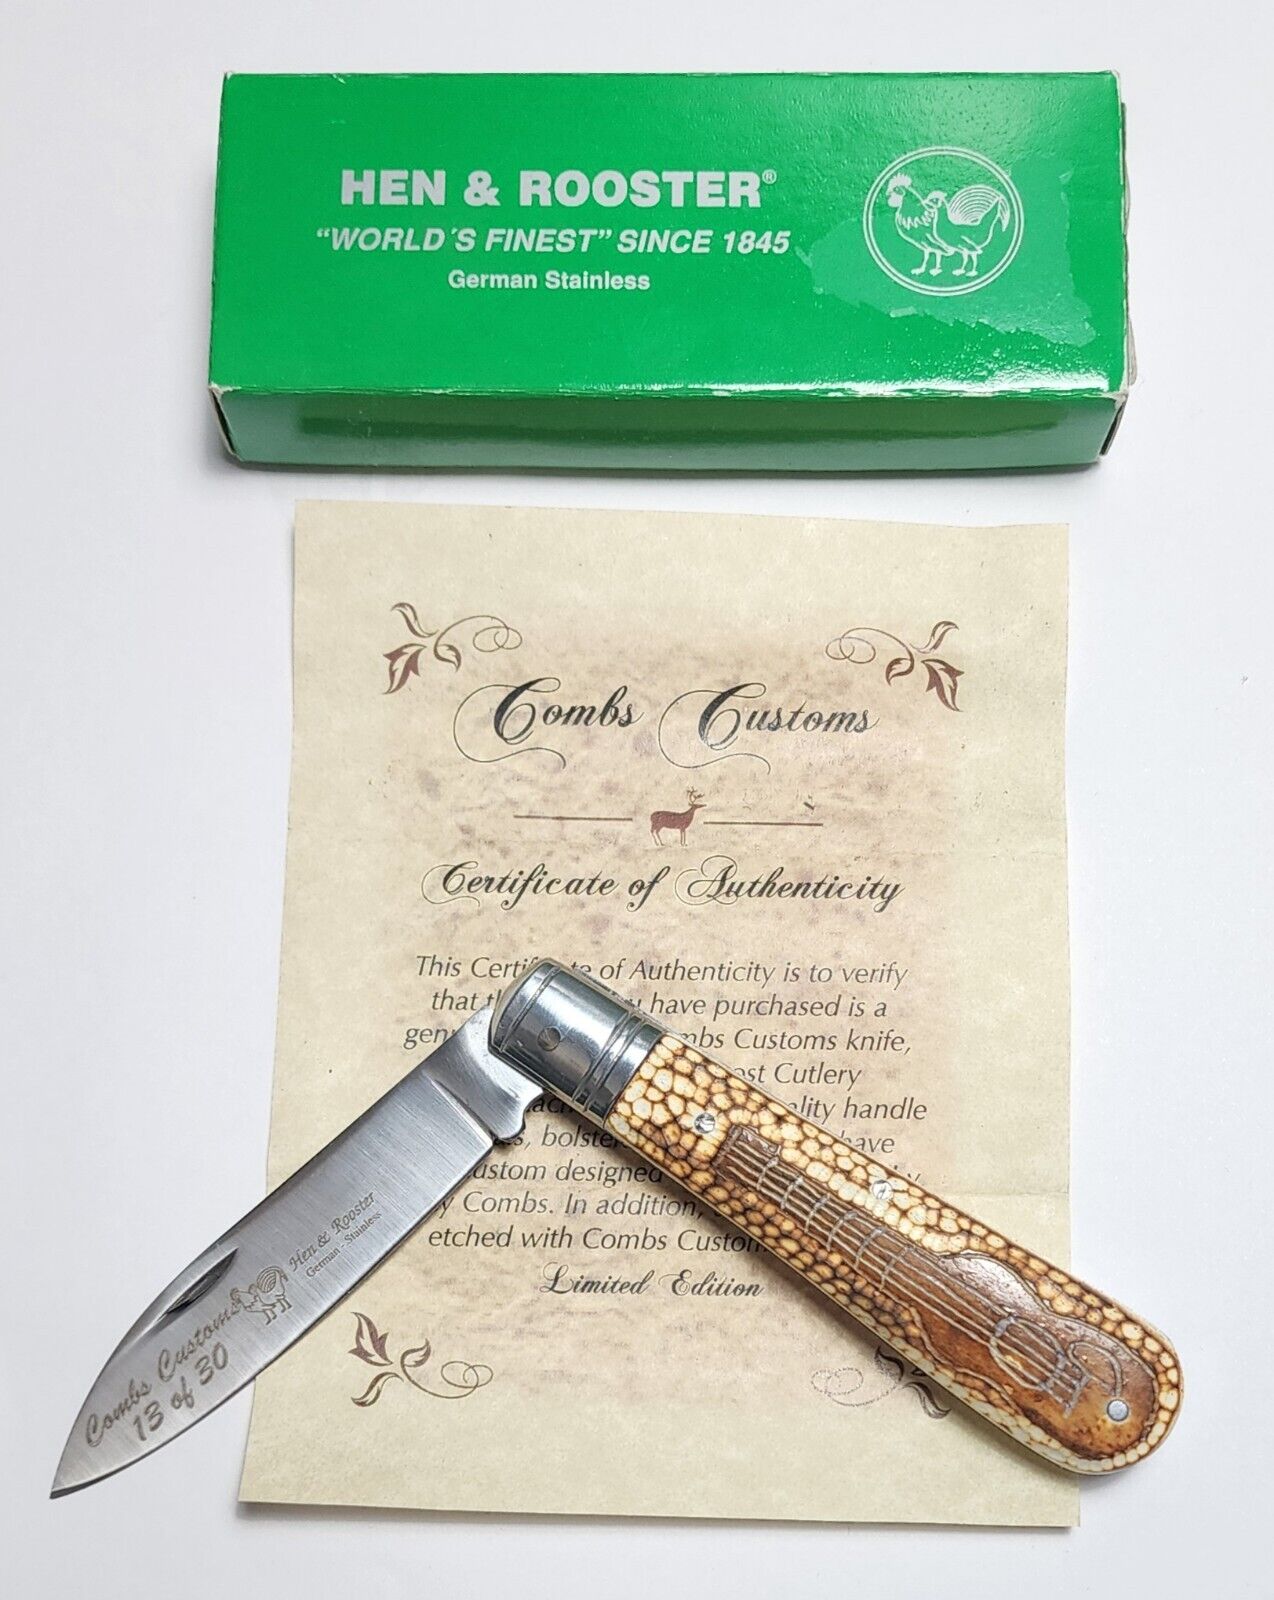 Hen & Rooster Combs Custom Pocketknife mint in box Limited Edition 13/30 Guitar